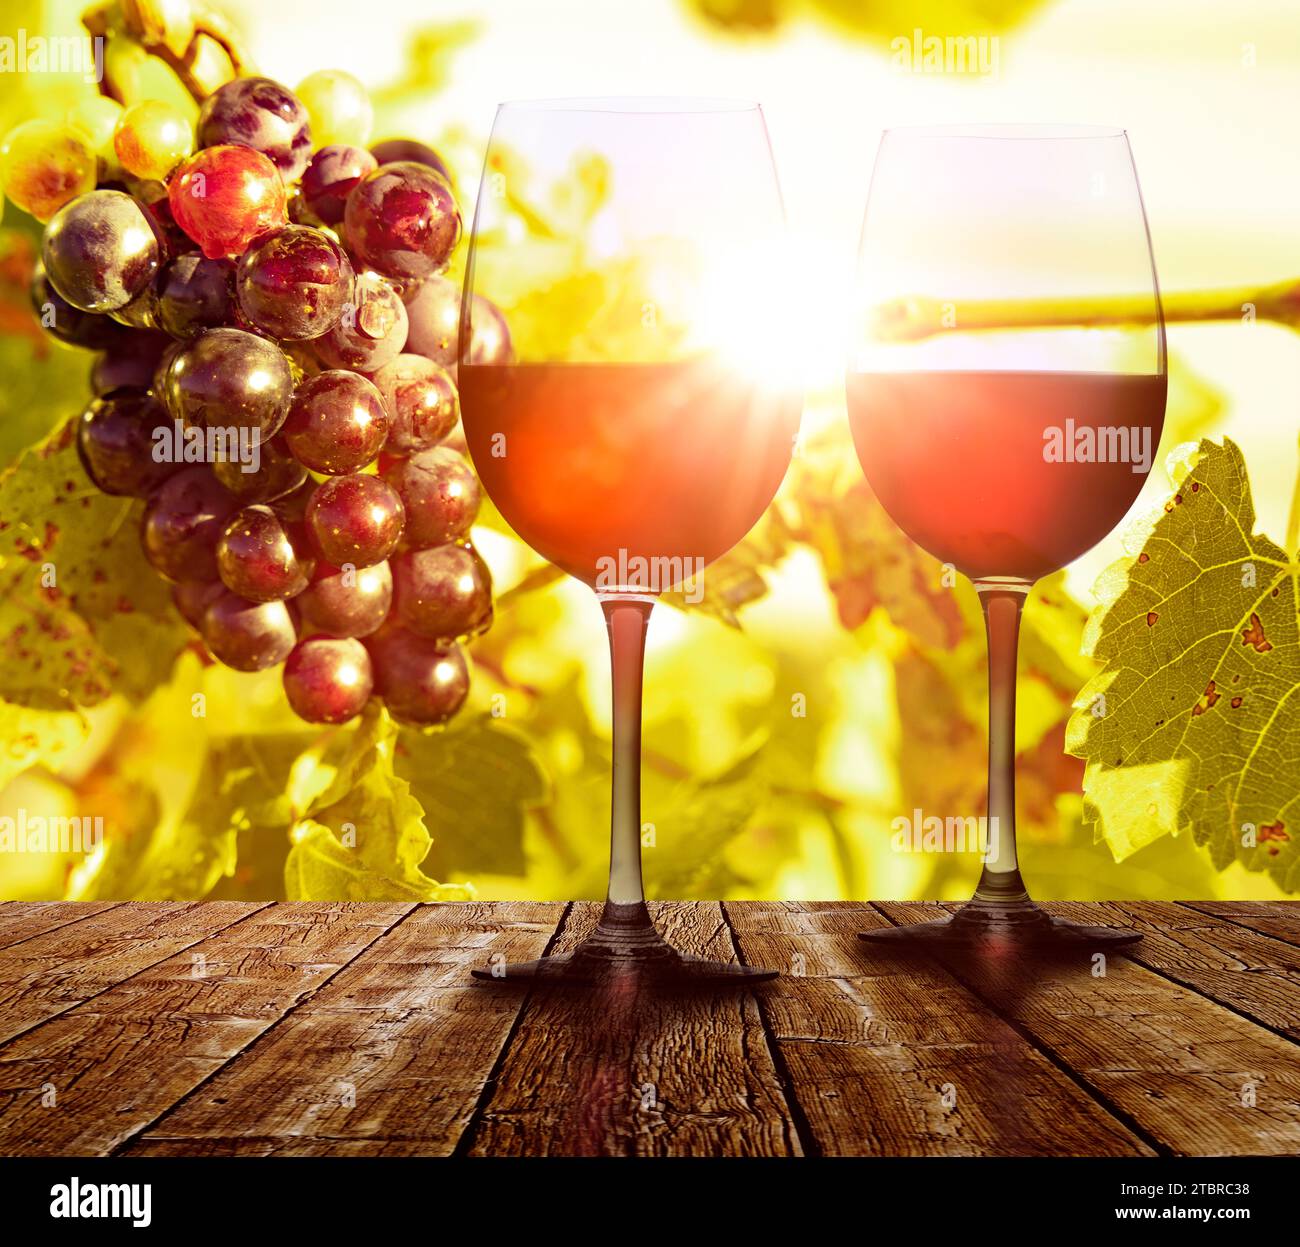 Grapes on the vine with red wine glass against the light Stock Photo